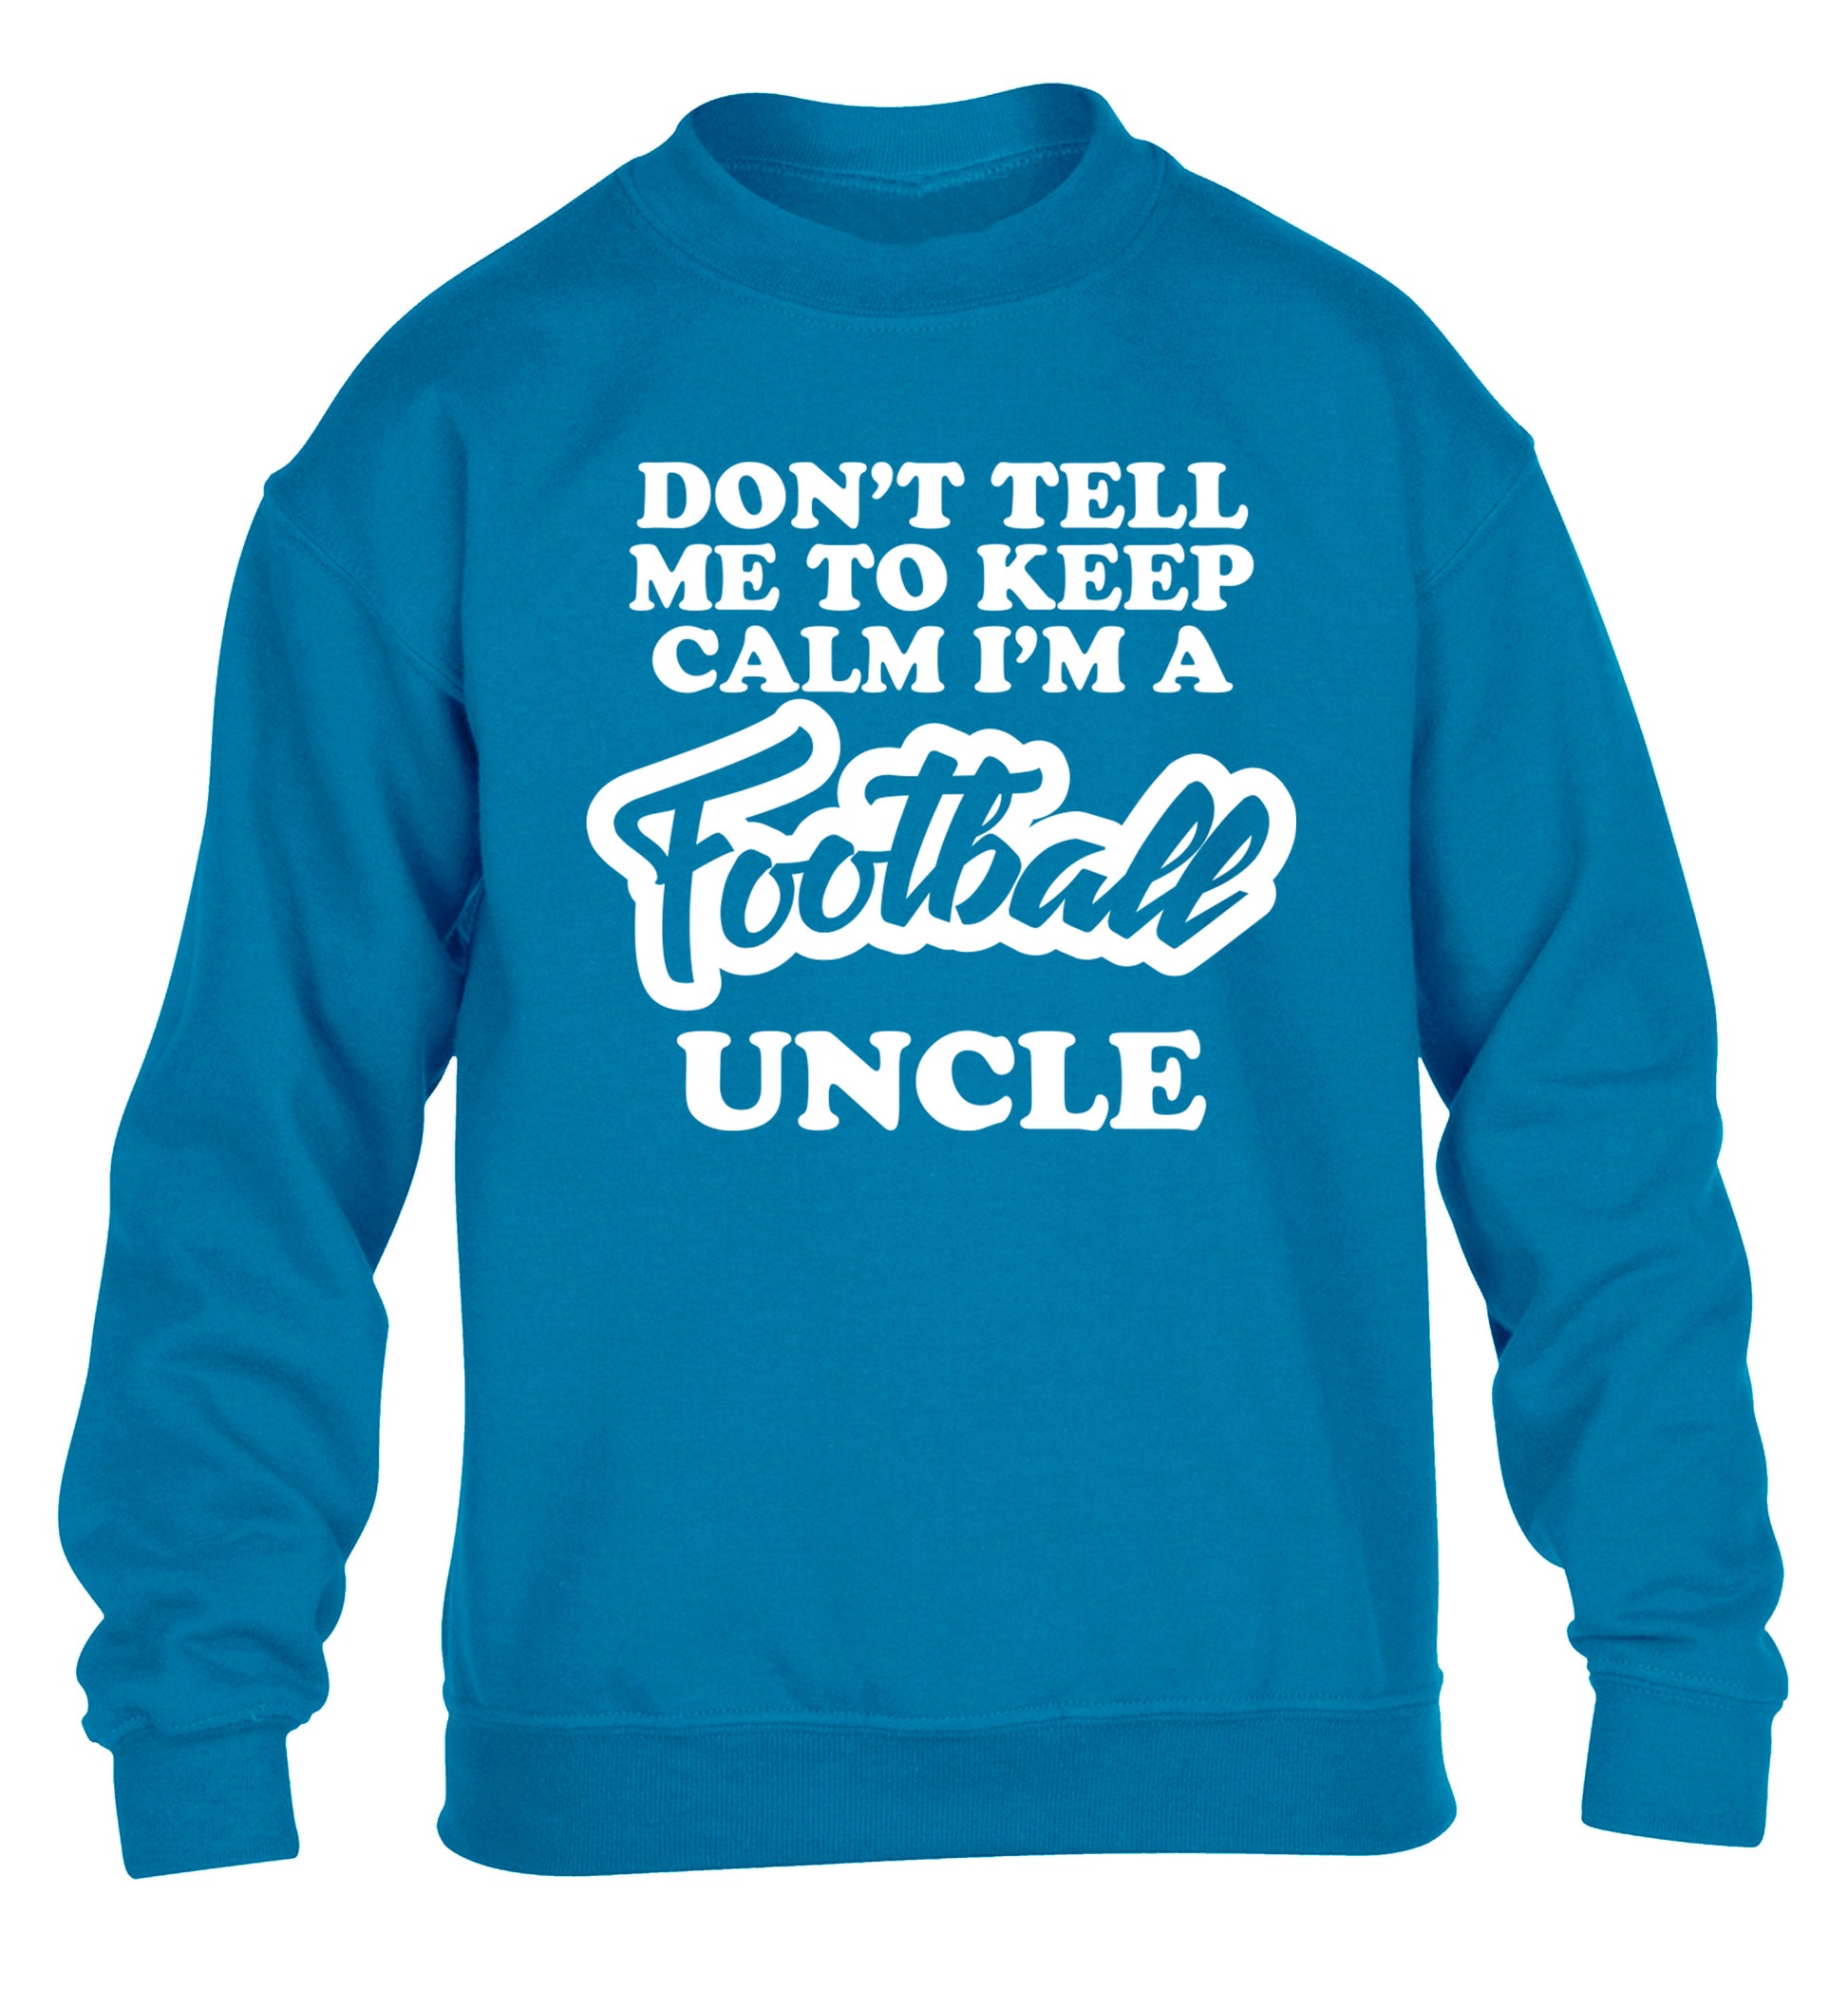 Worlds most amazing football uncle children's blue sweater 12-14 Years